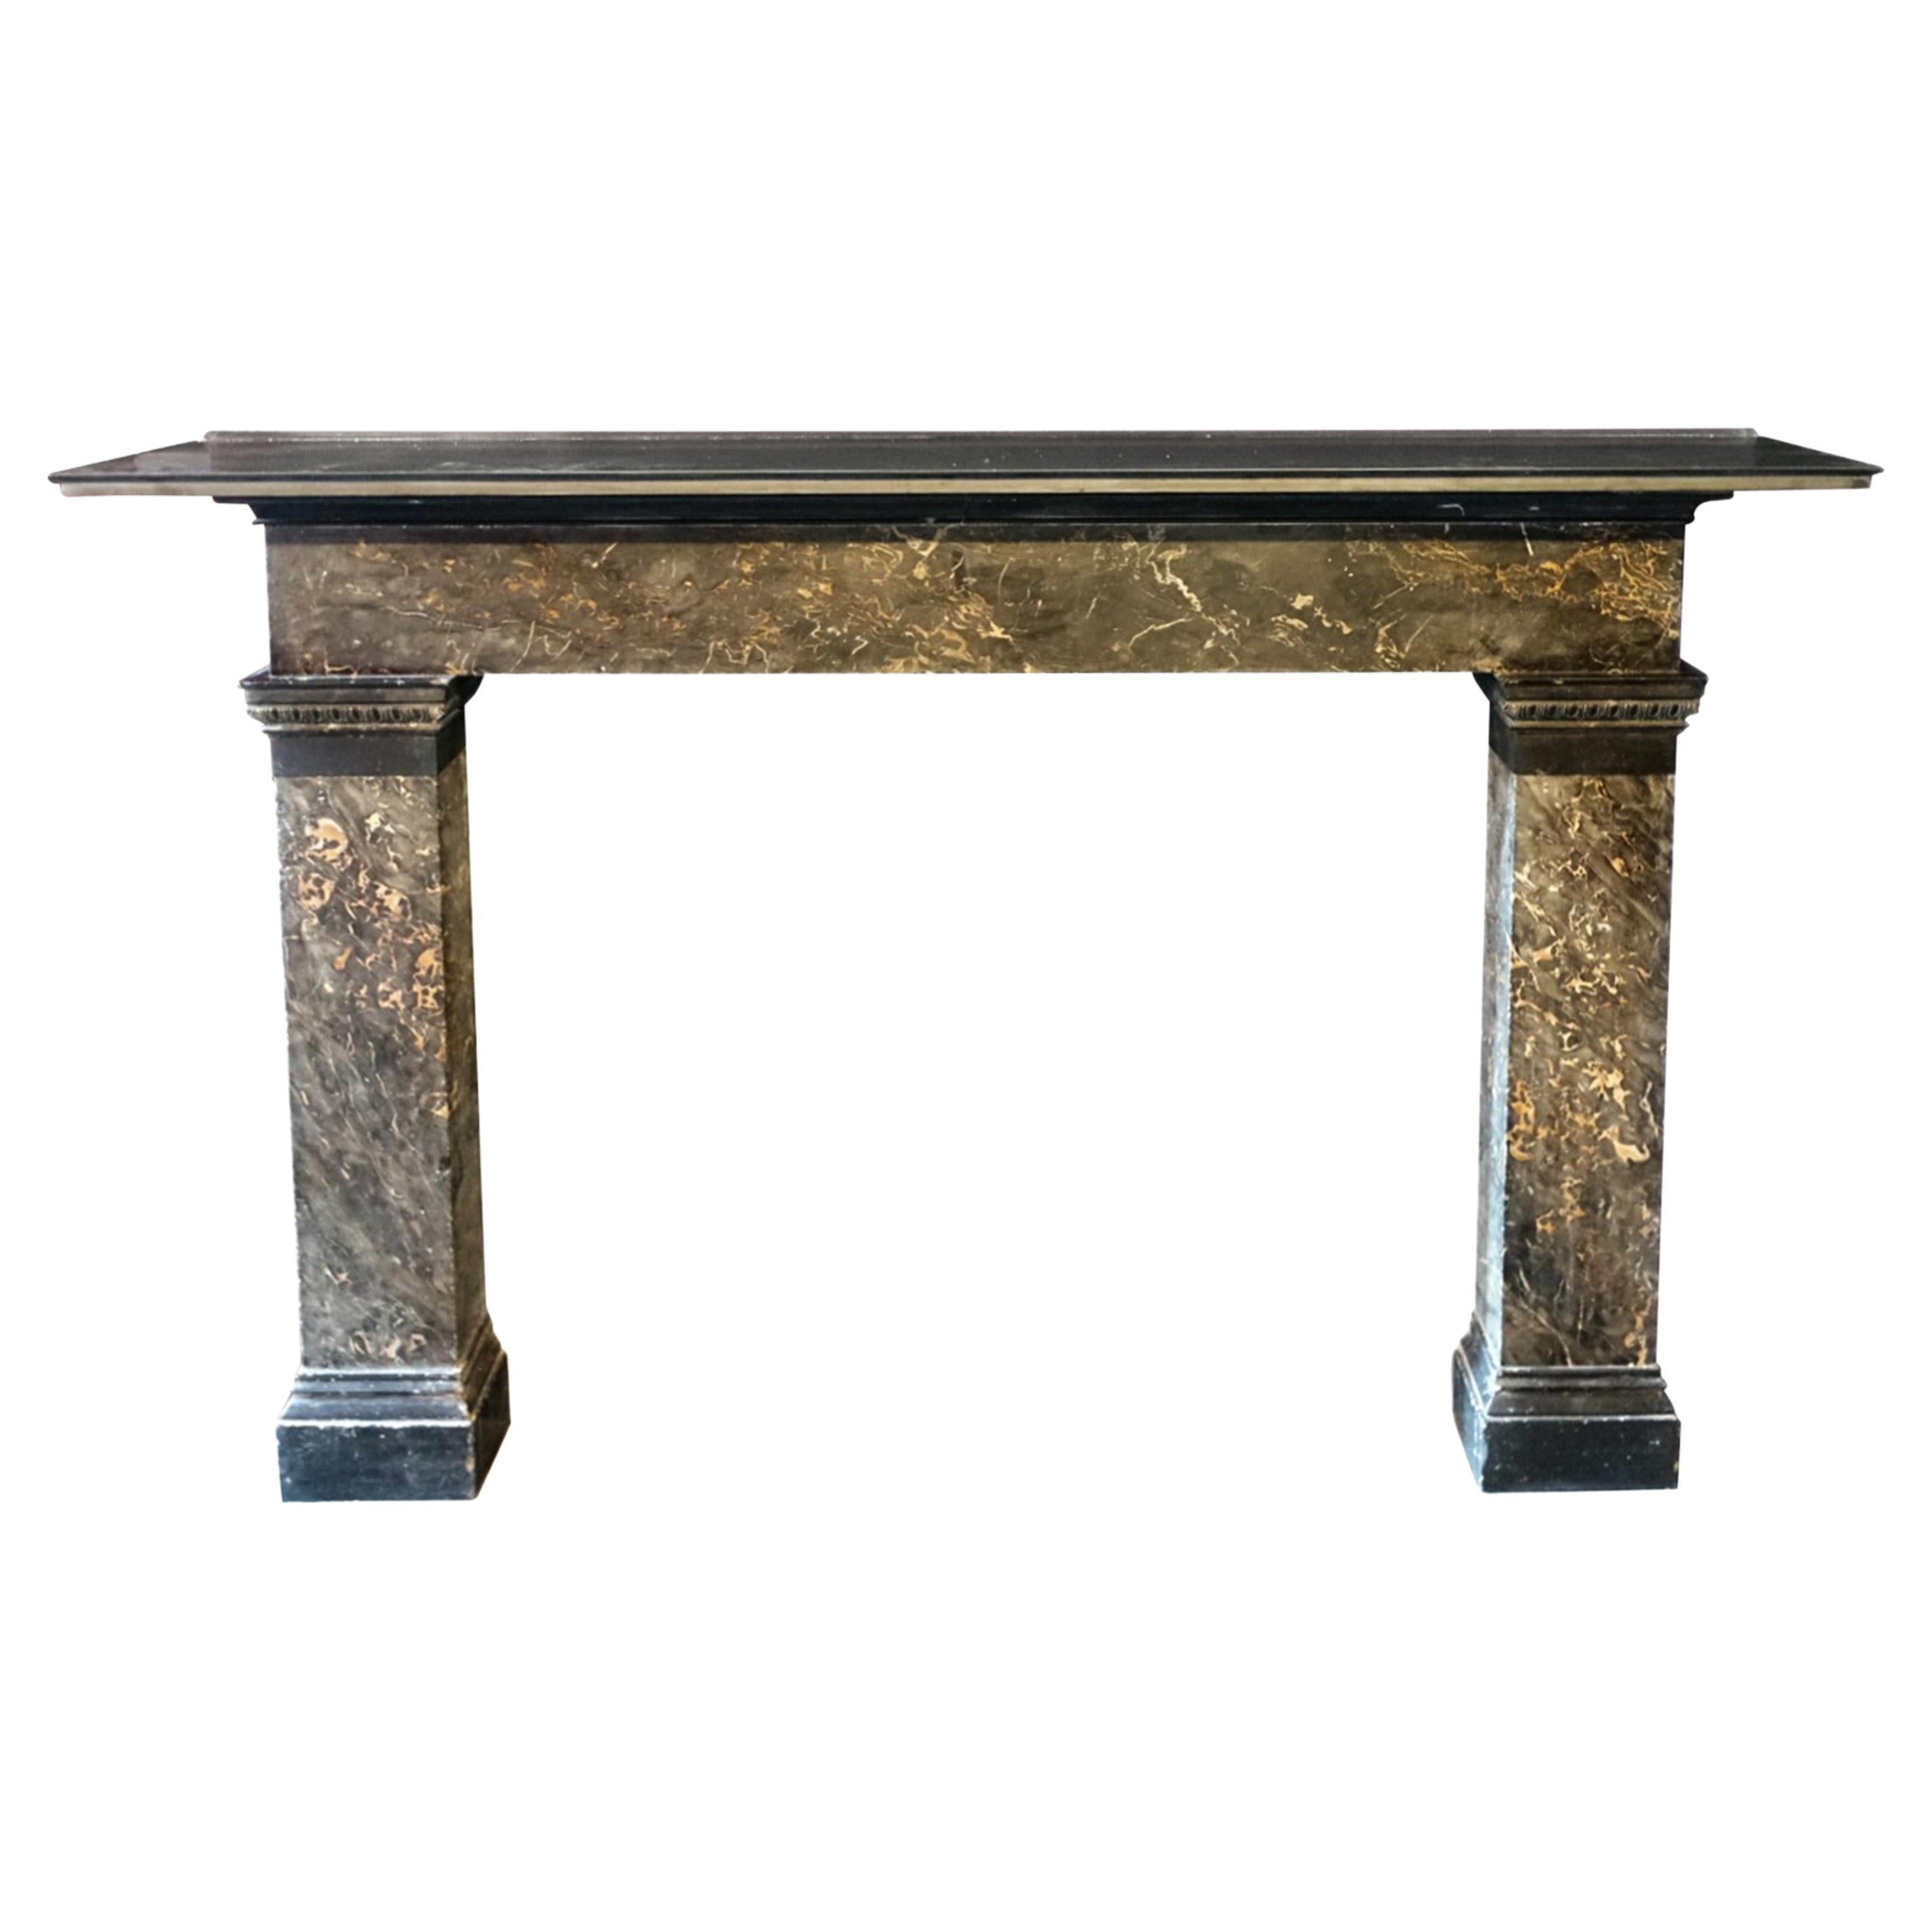 1899 Hand Carved Italian Portoro Marble Mantel West 11th St, Manhattan, NY For Sale